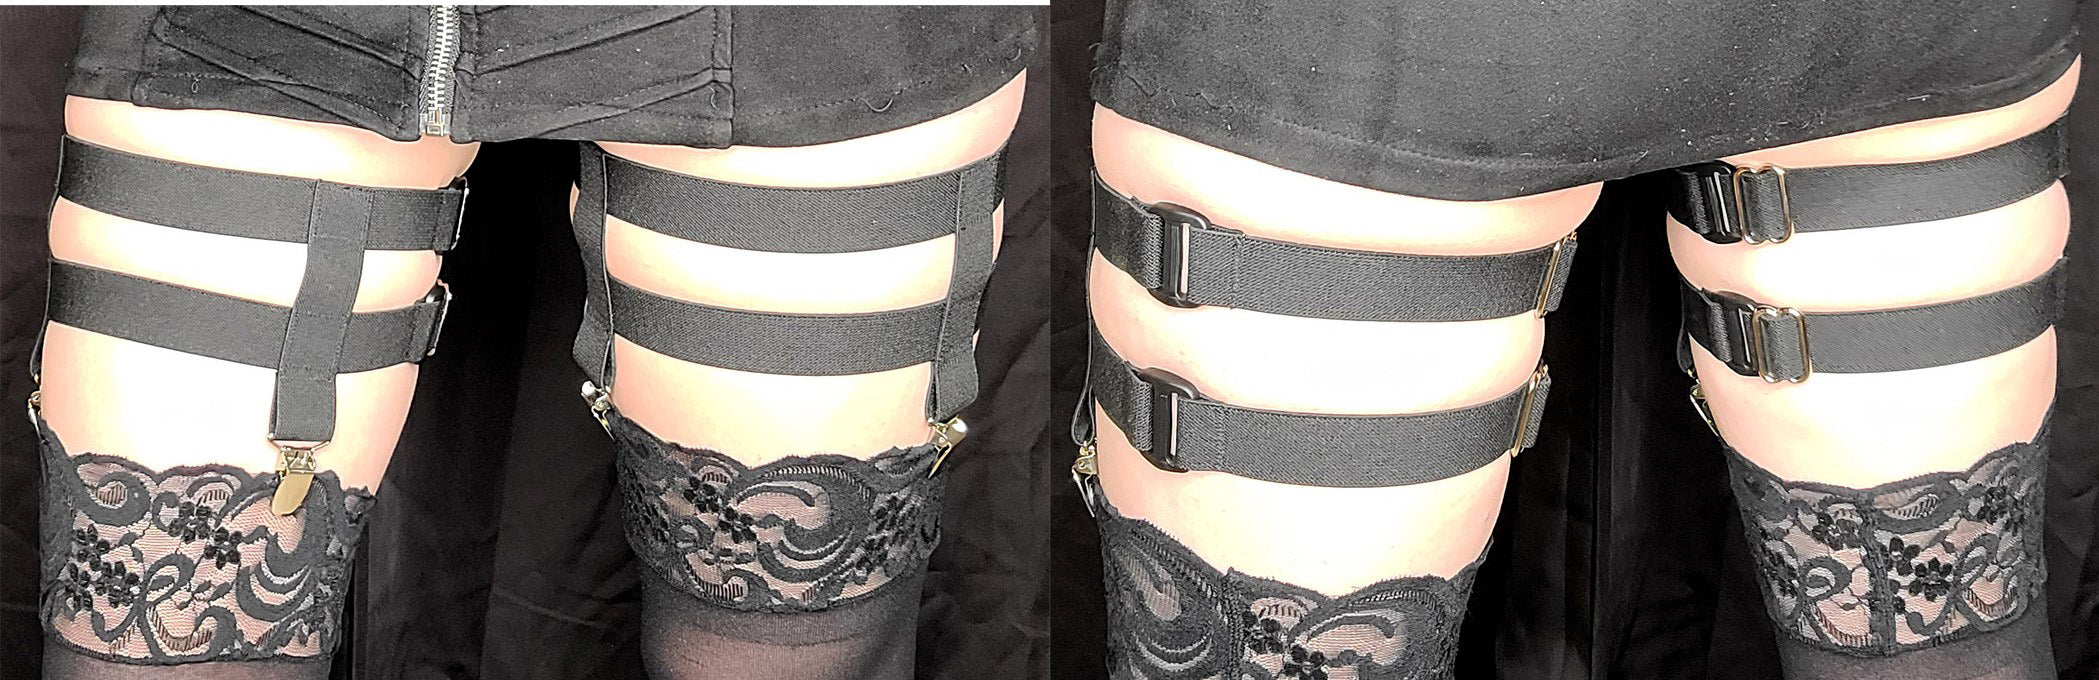 2-Clip Garters with 2 Leg Straps